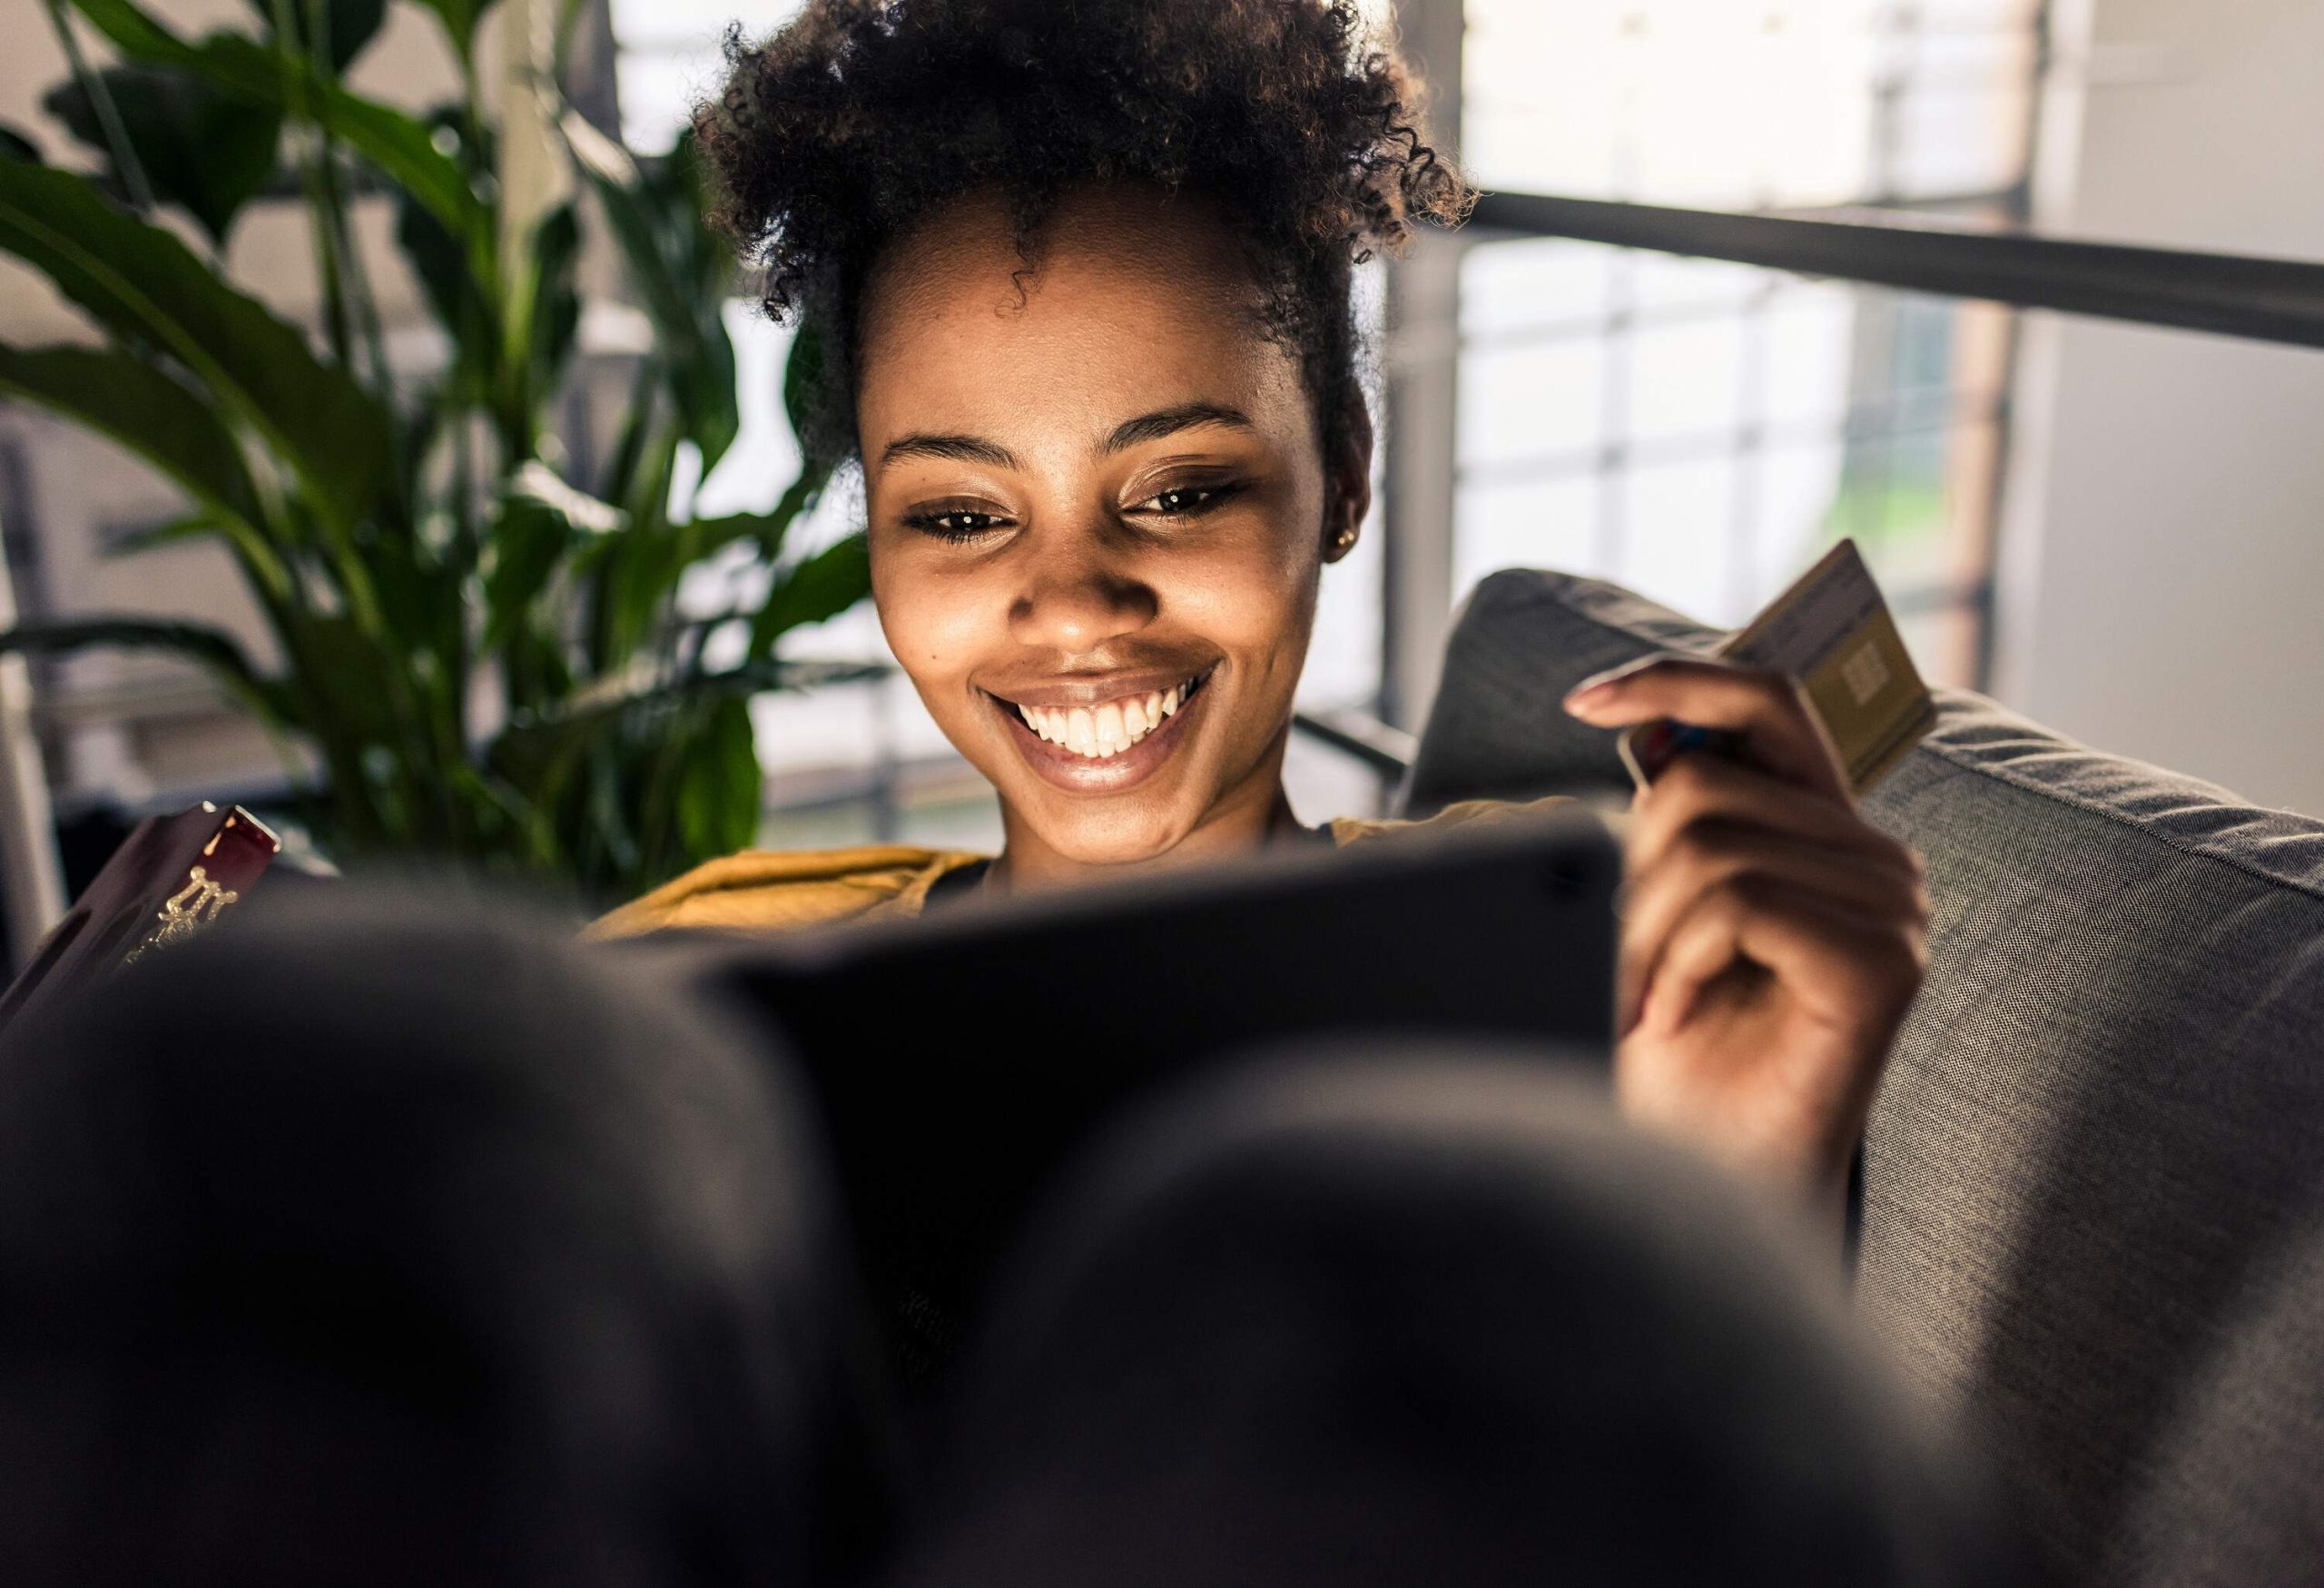 A curly-haired woman sits on a sofa and smiles at her laptop while holding a credit card.